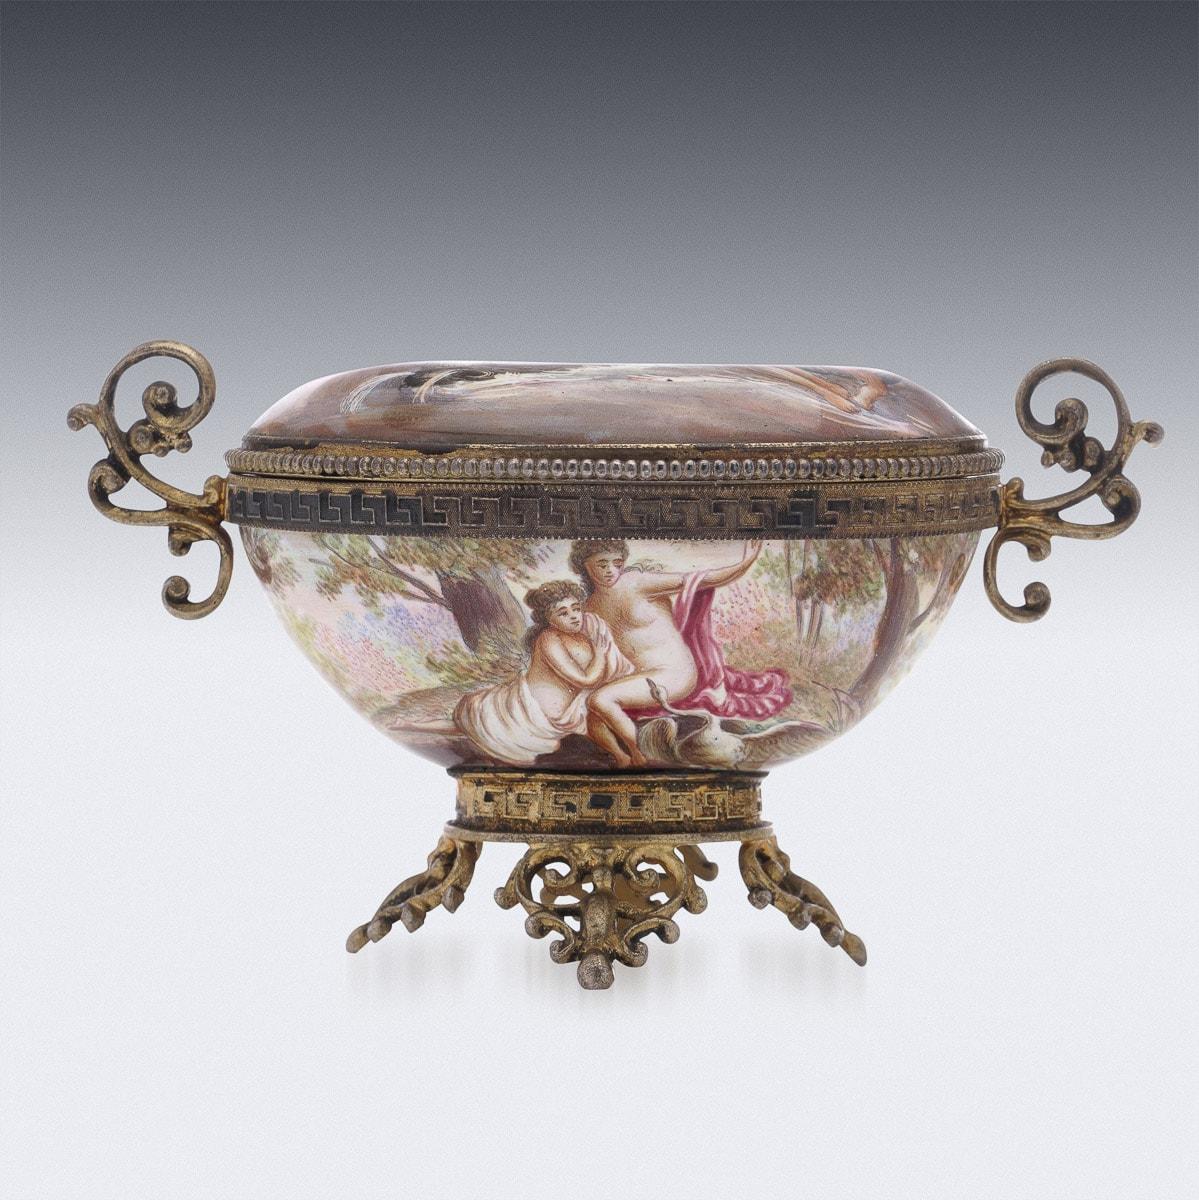 Antique 19th century Austrian Renaissance revival solid silver enameled lidded bowl / trinket box, the body supported by four scroll feet, beautifully enamelled throughout dipicting various mythological scenes, inside lid painted with a landscape